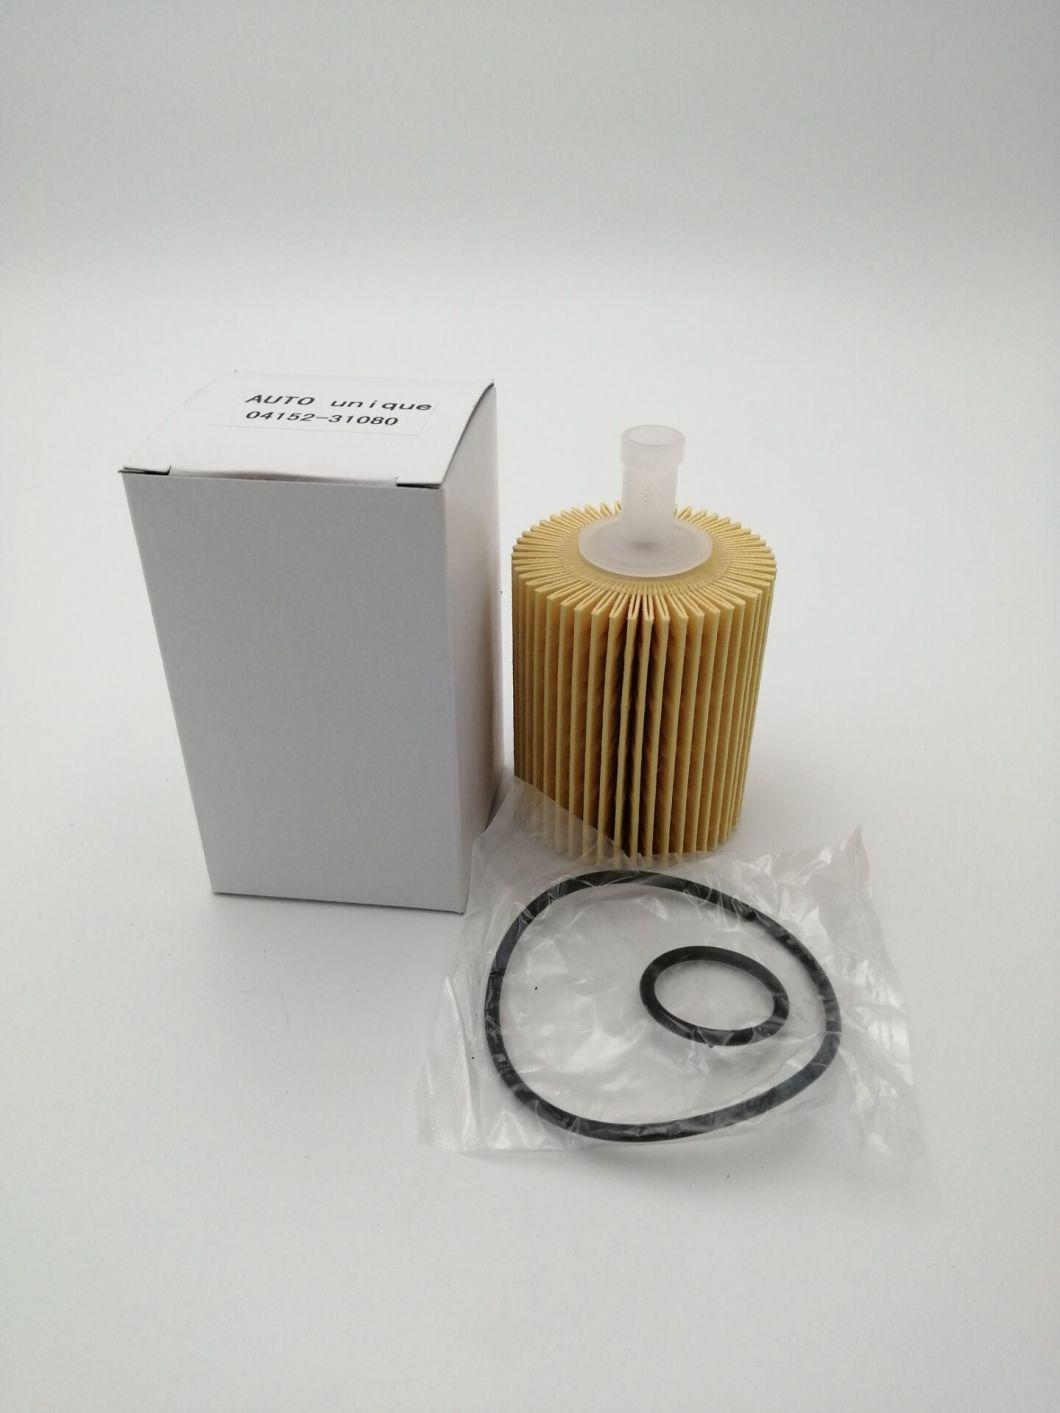 Auto Parts Filter Element Car Parts 04152-31080/Yzza3/Yzza5 Oil Filter for Toyota